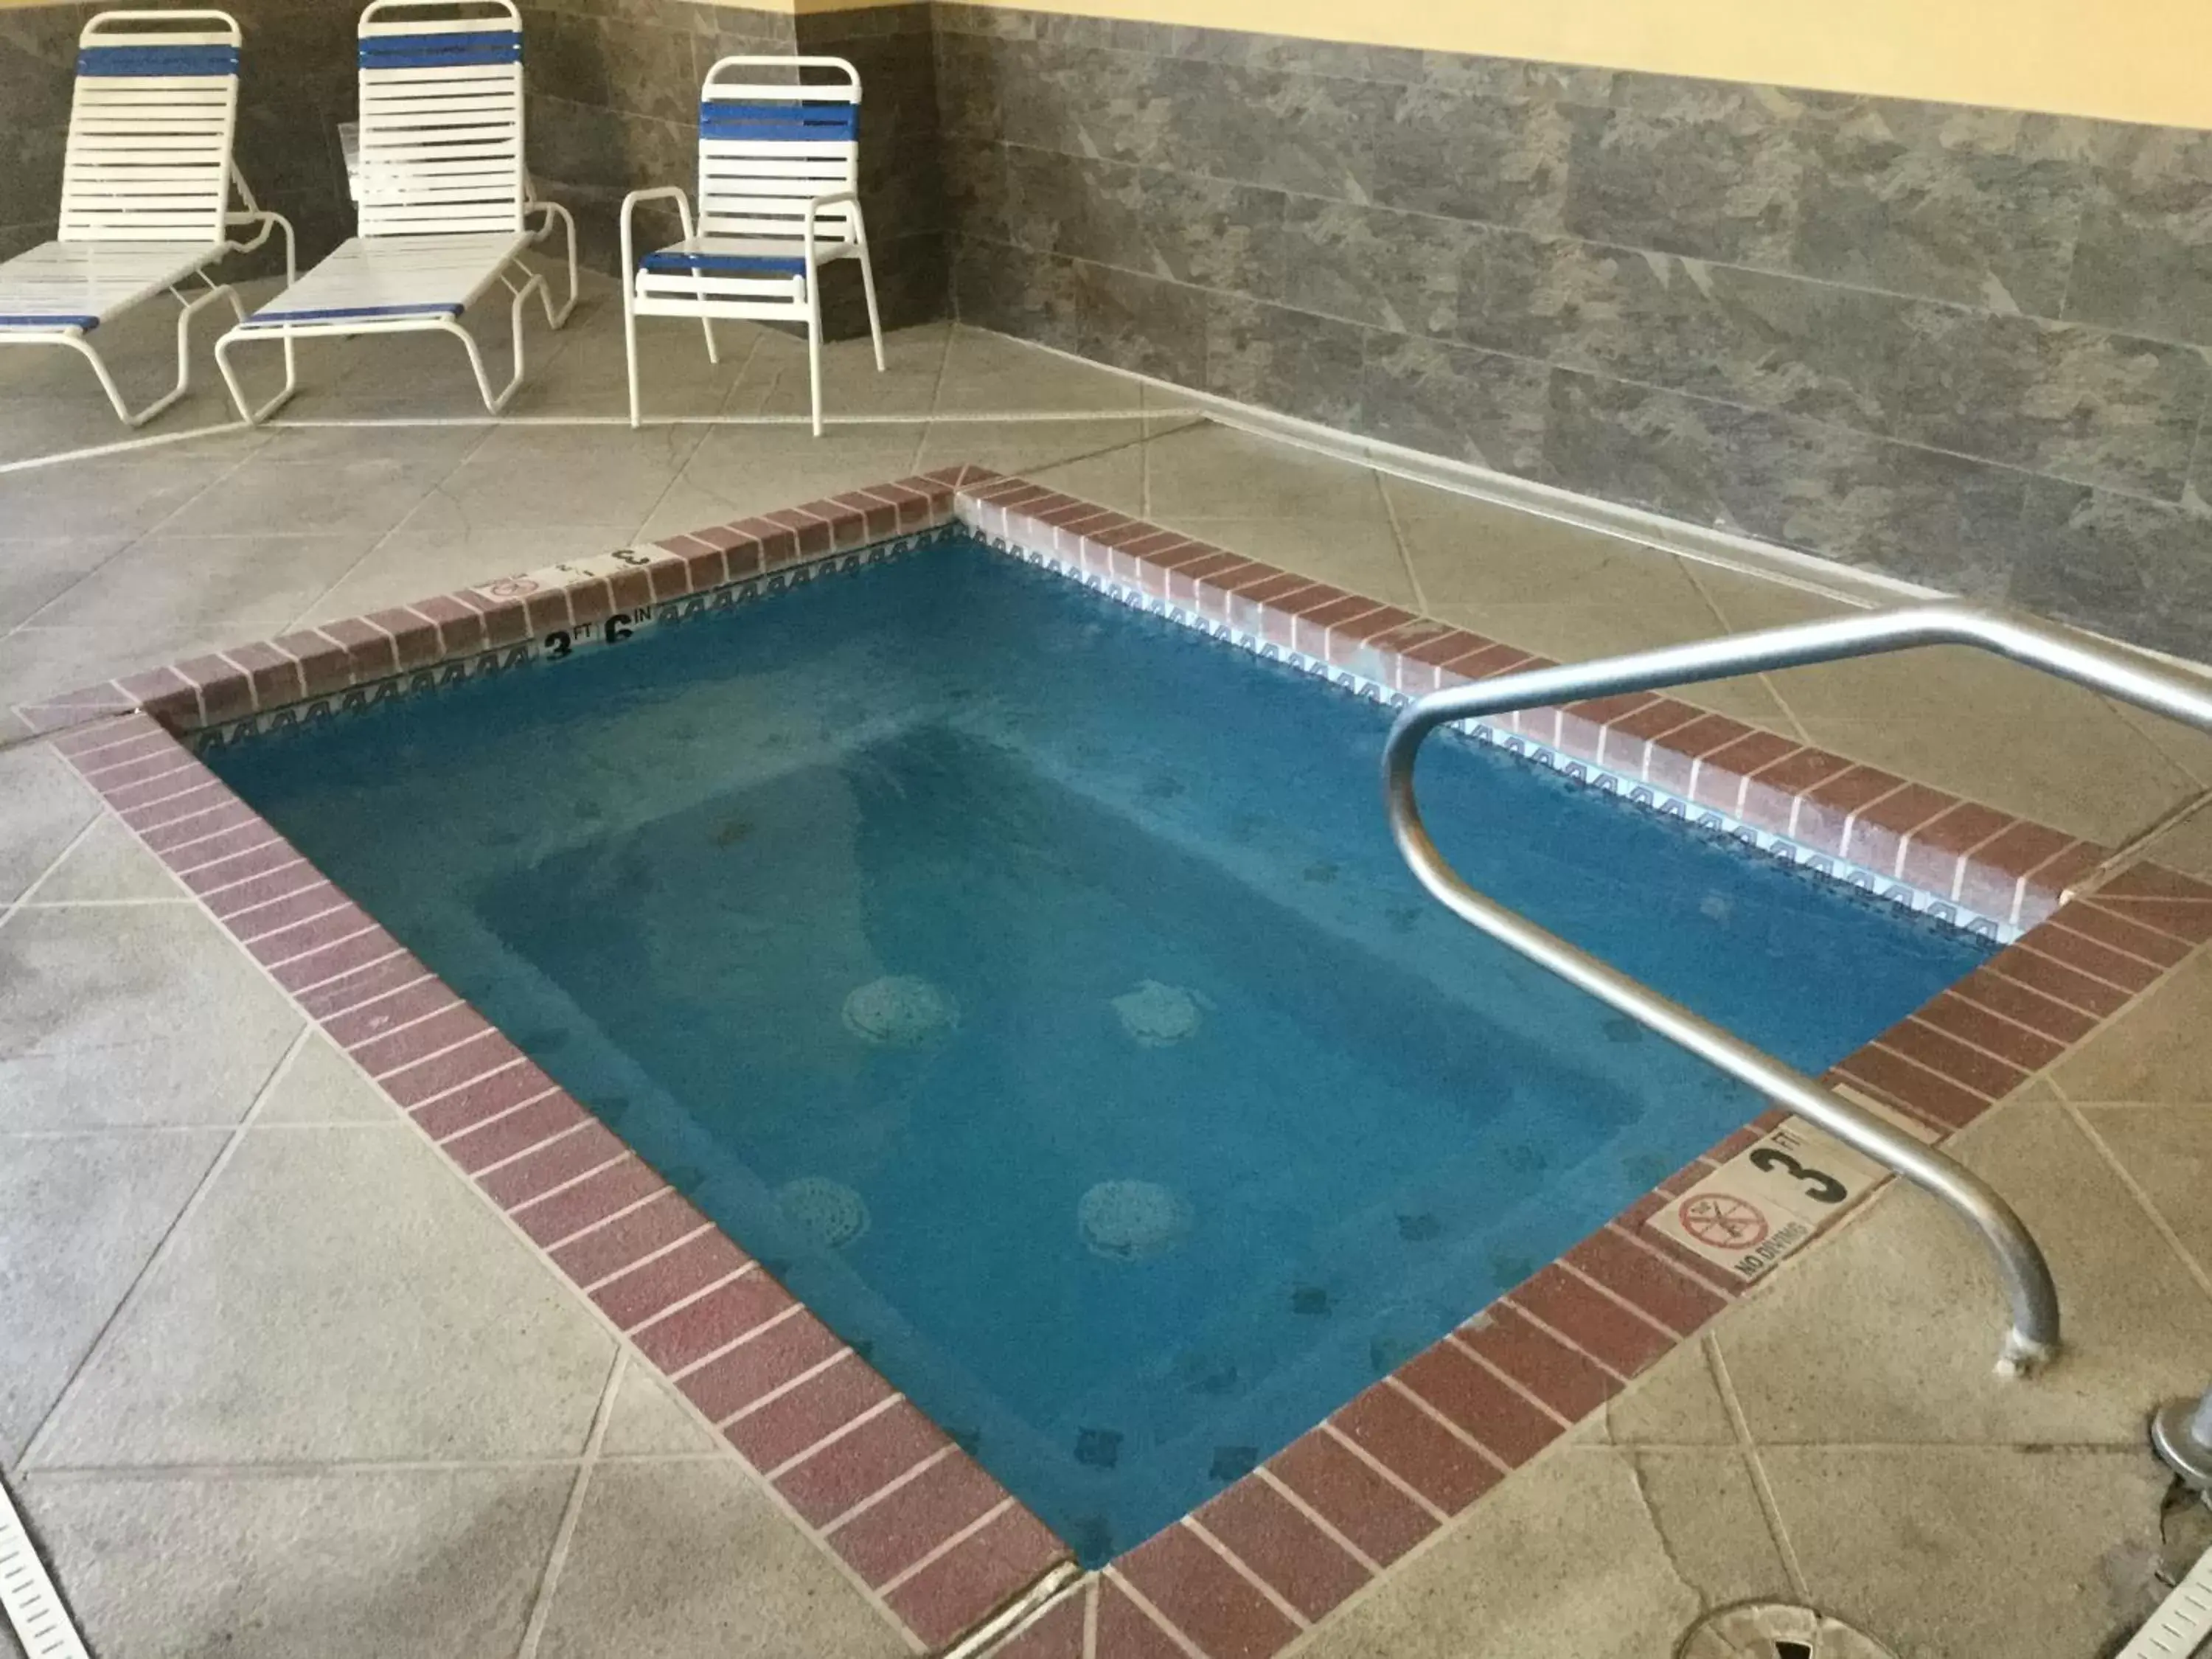 Swimming Pool in Days Inn by Wyndham Hurricane/Zion National Park Area